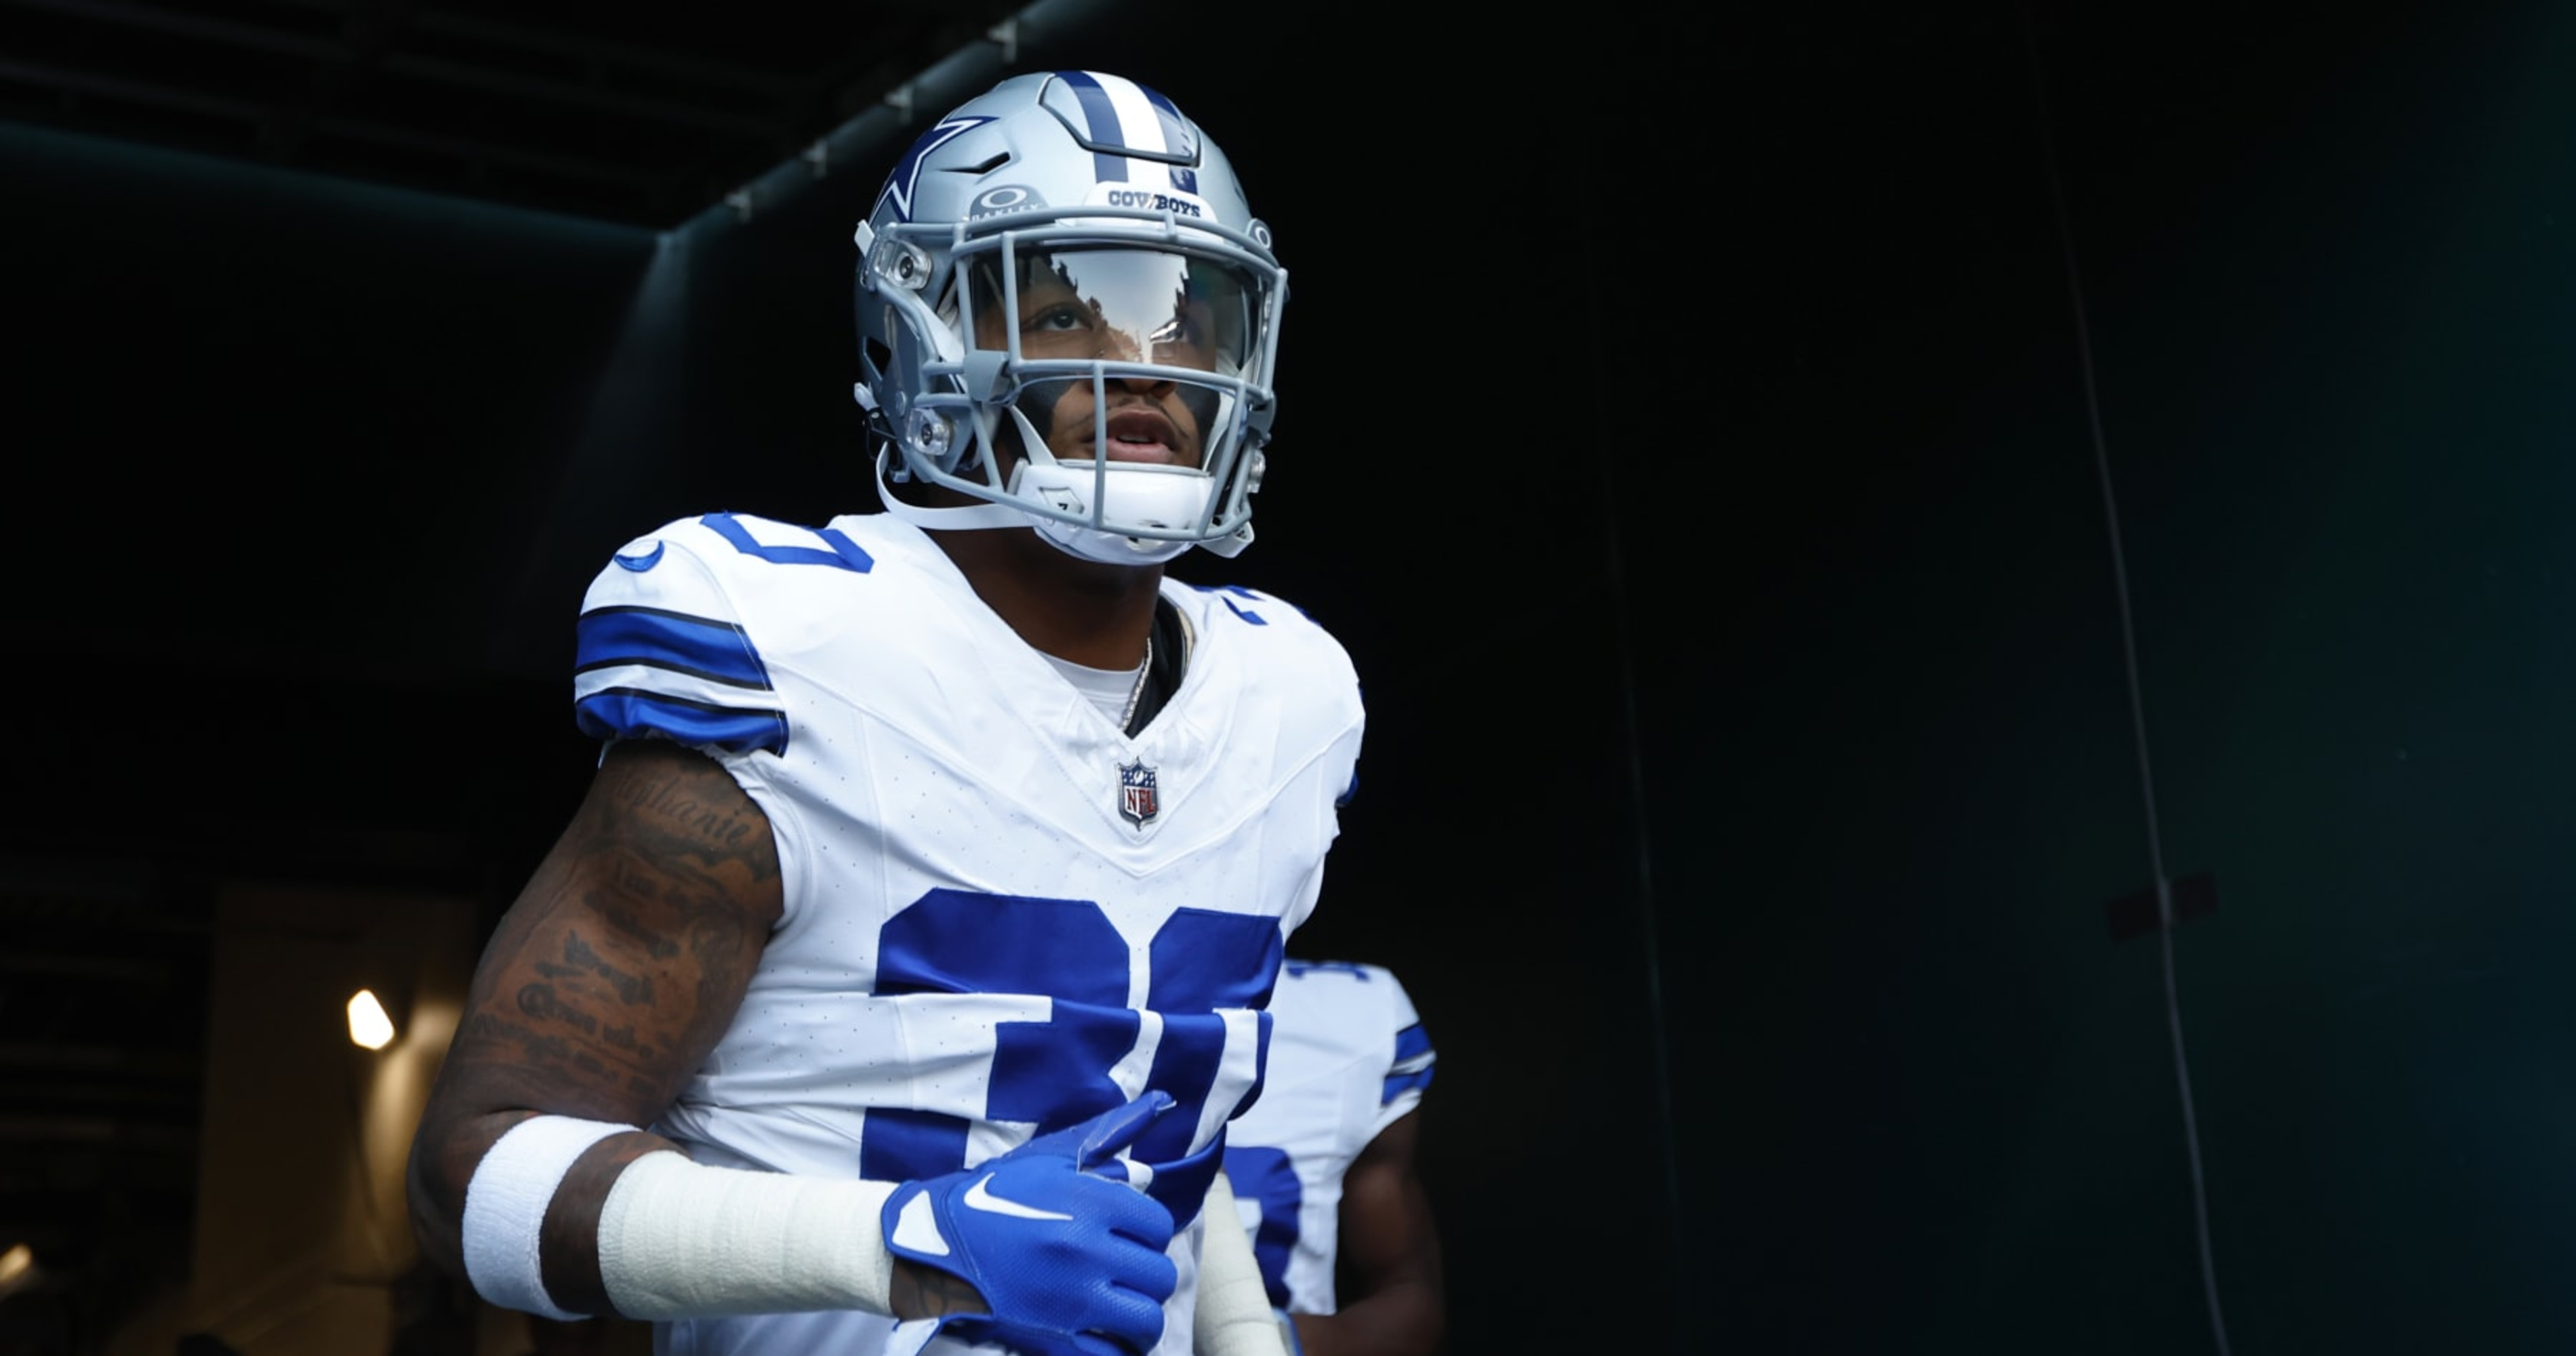 Playing for 'America's Team': The relentless pressure of life as a Dallas  Cowboy - Mirror Online